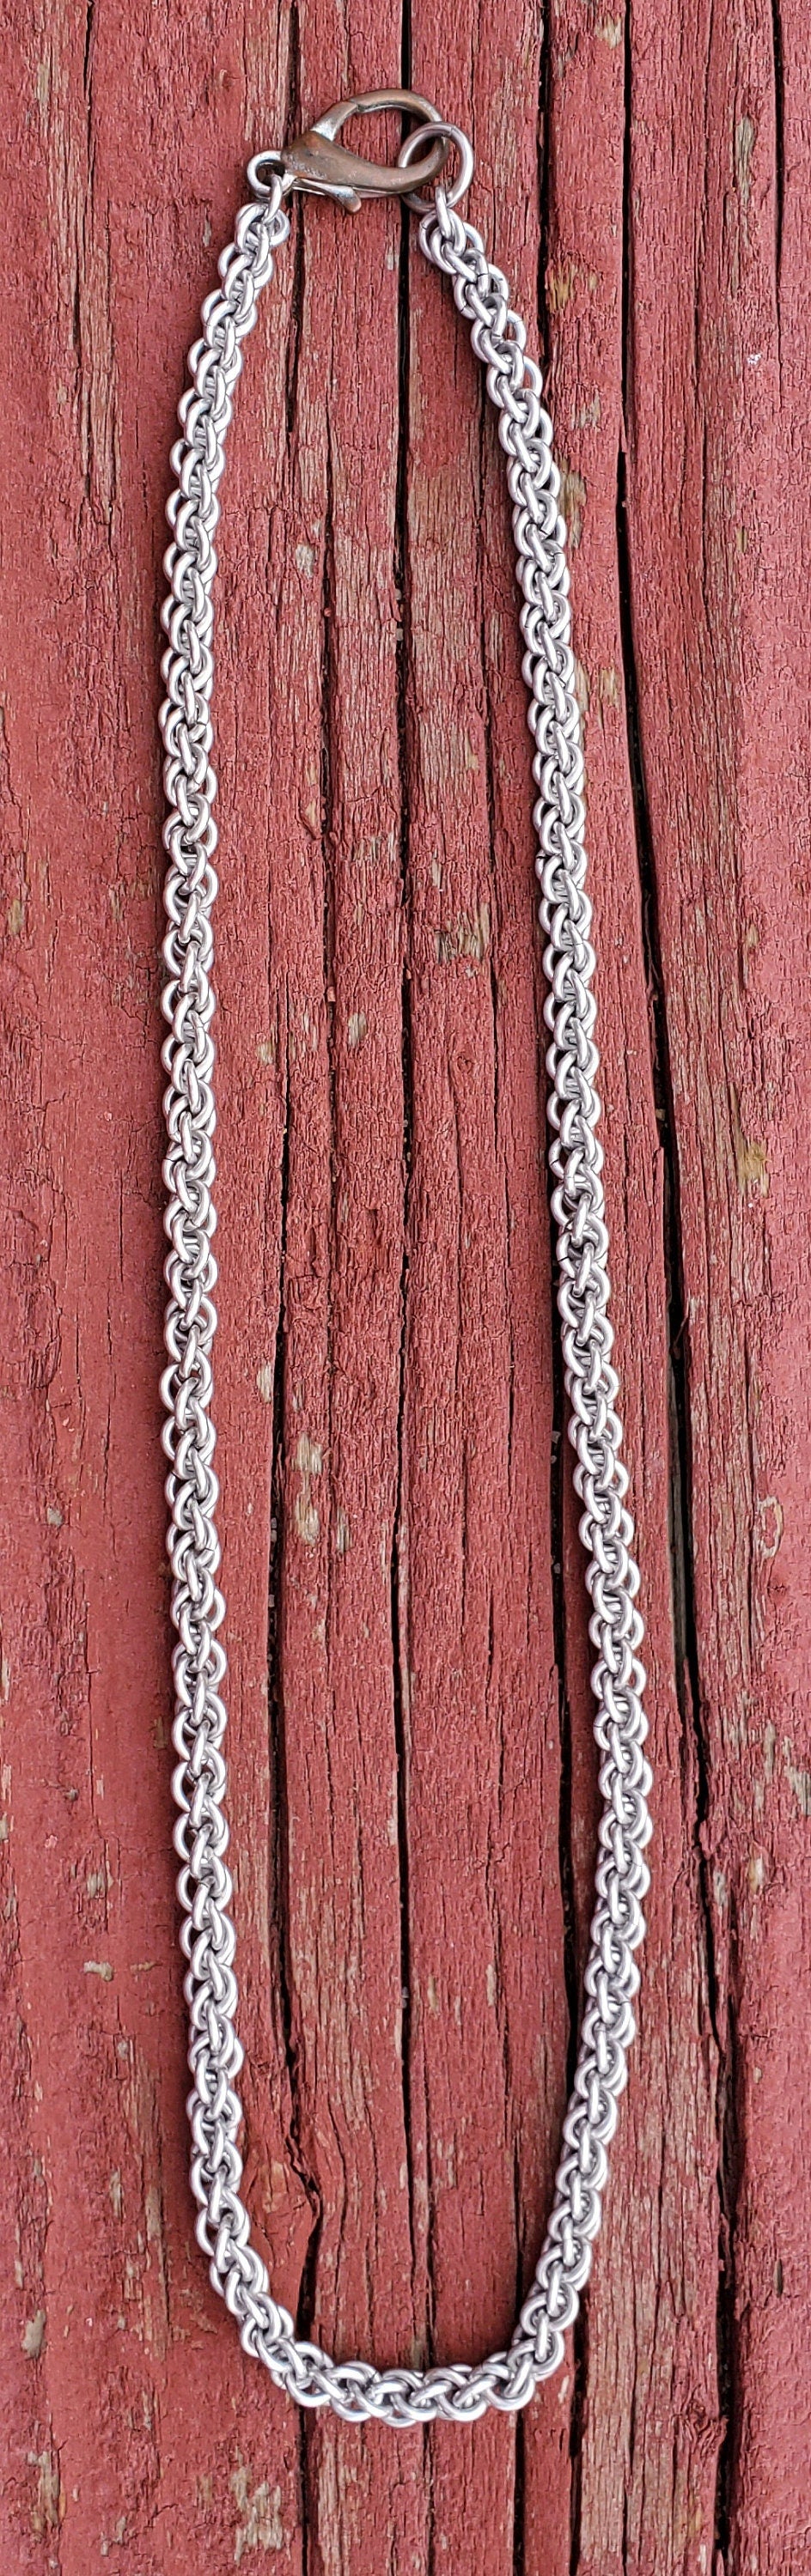 JPL3 Necklace Chain, Handmade Chainmaille necklace, Pendant perfect